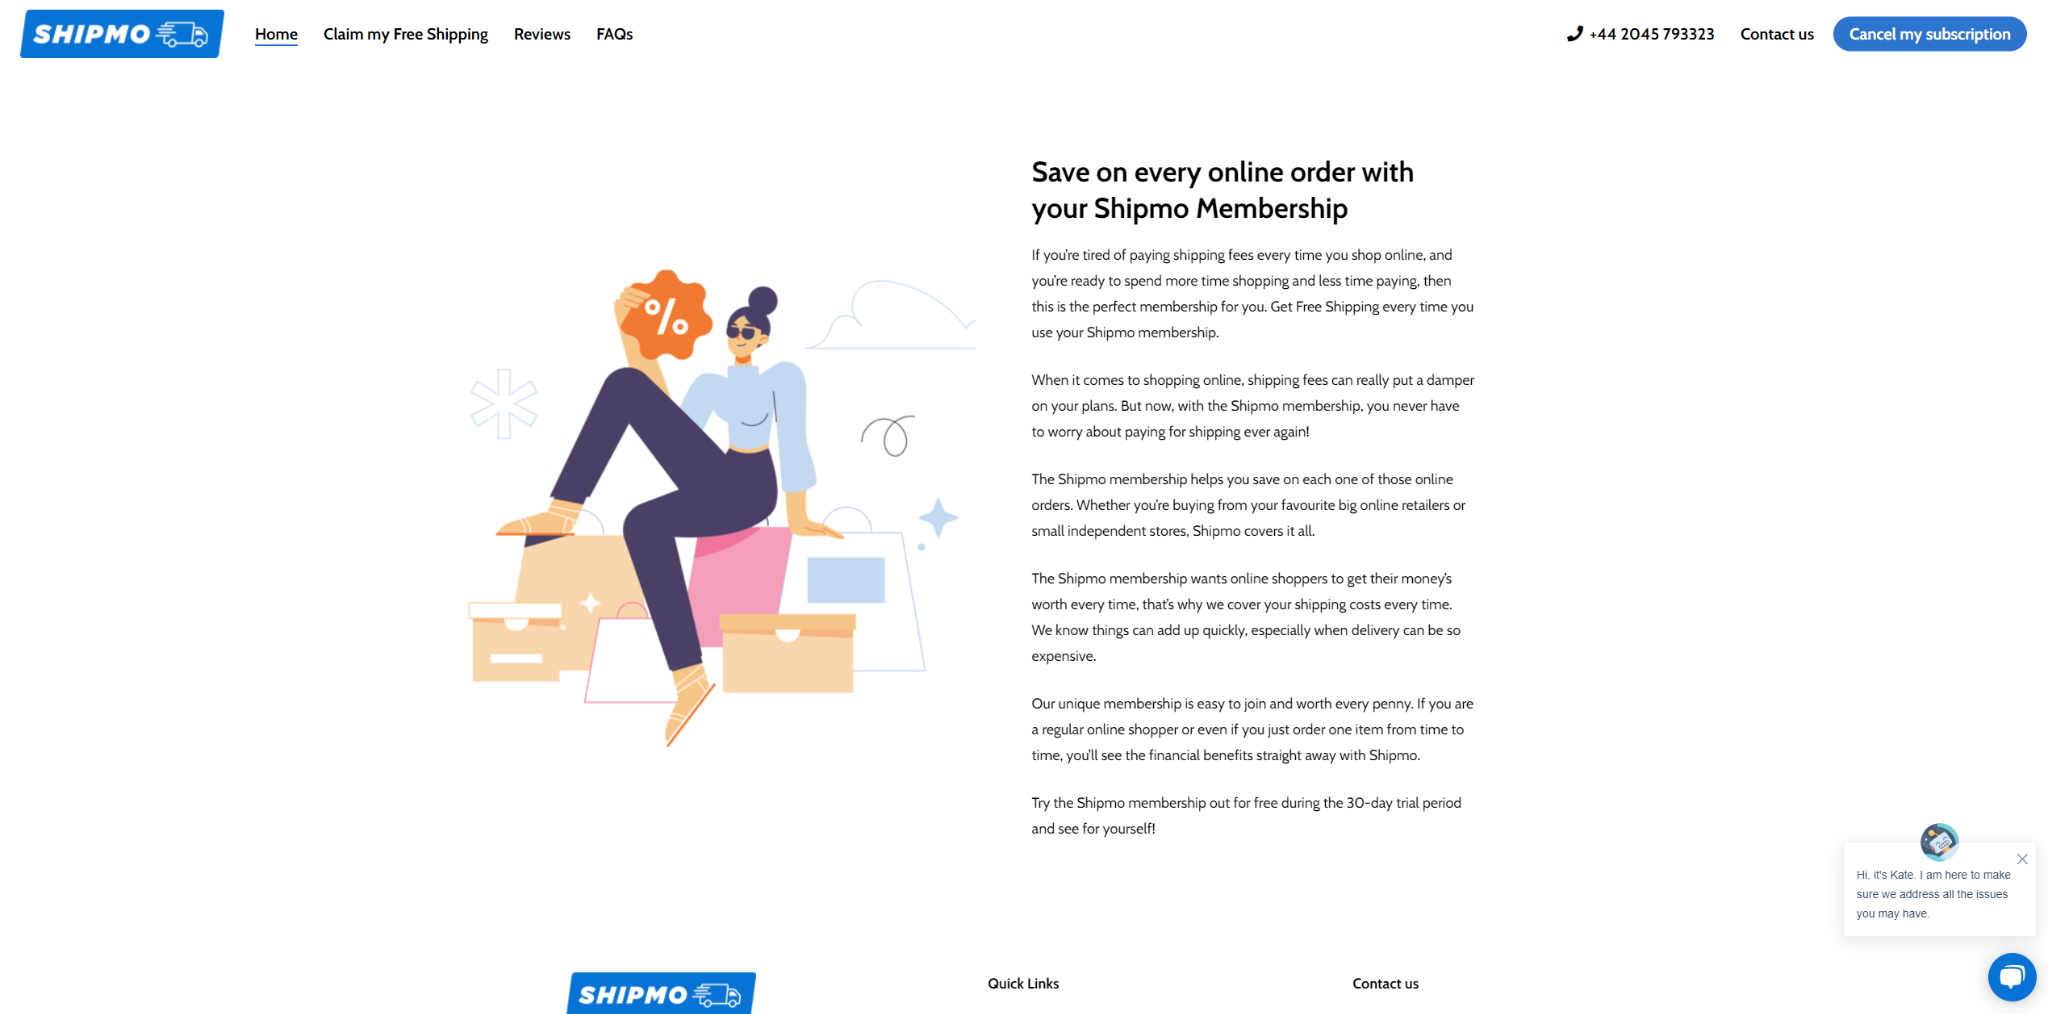 How to get free delivery online with Shipmo?